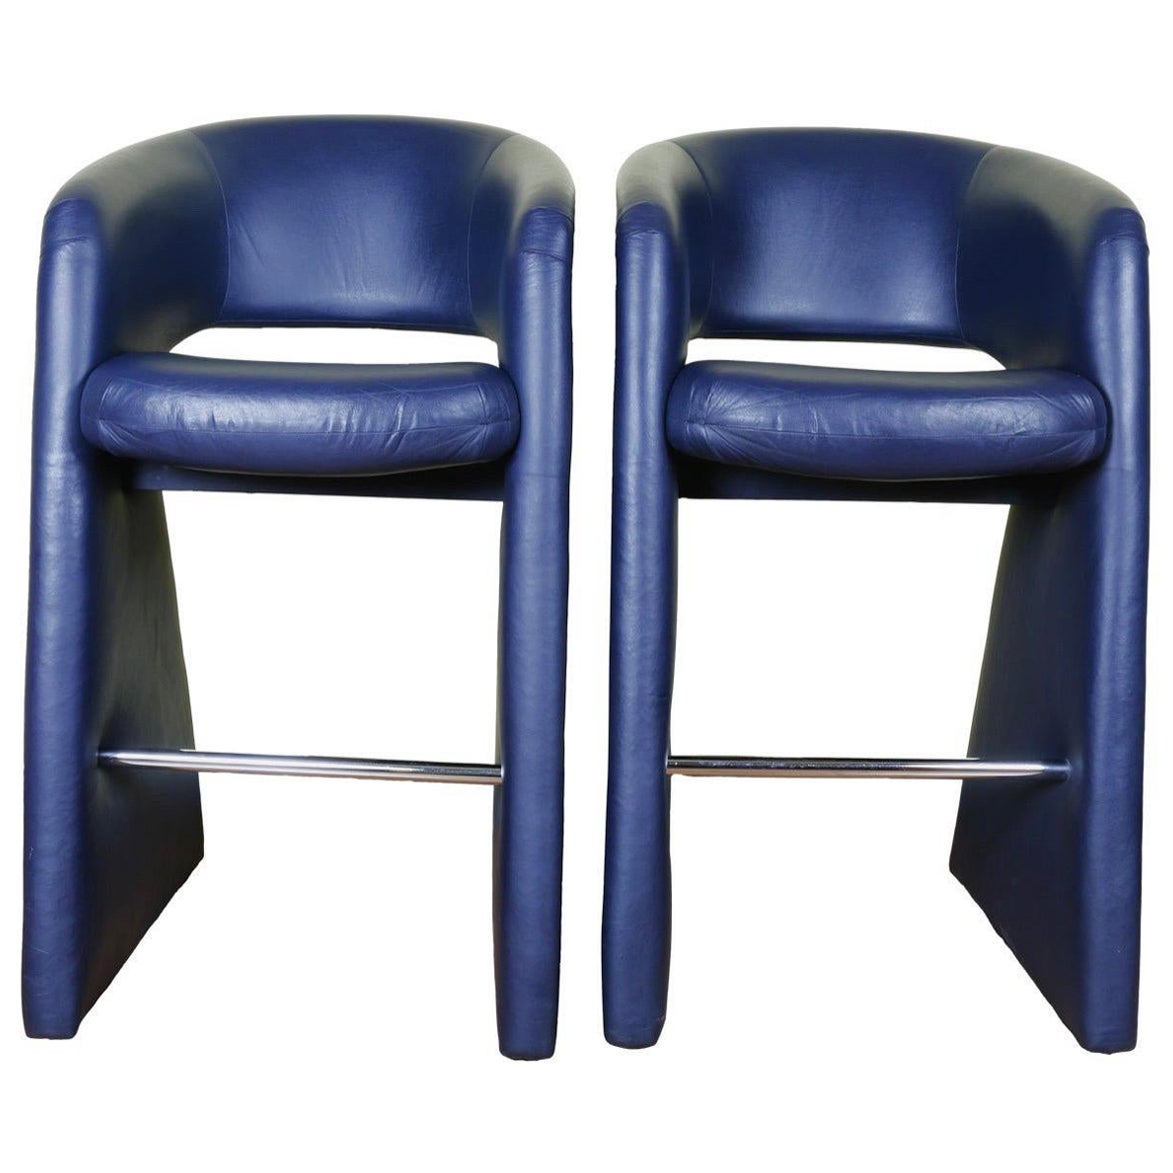 Pair of Leather Bar Stools by Milo Baughman for Thayer Coggin Inc.